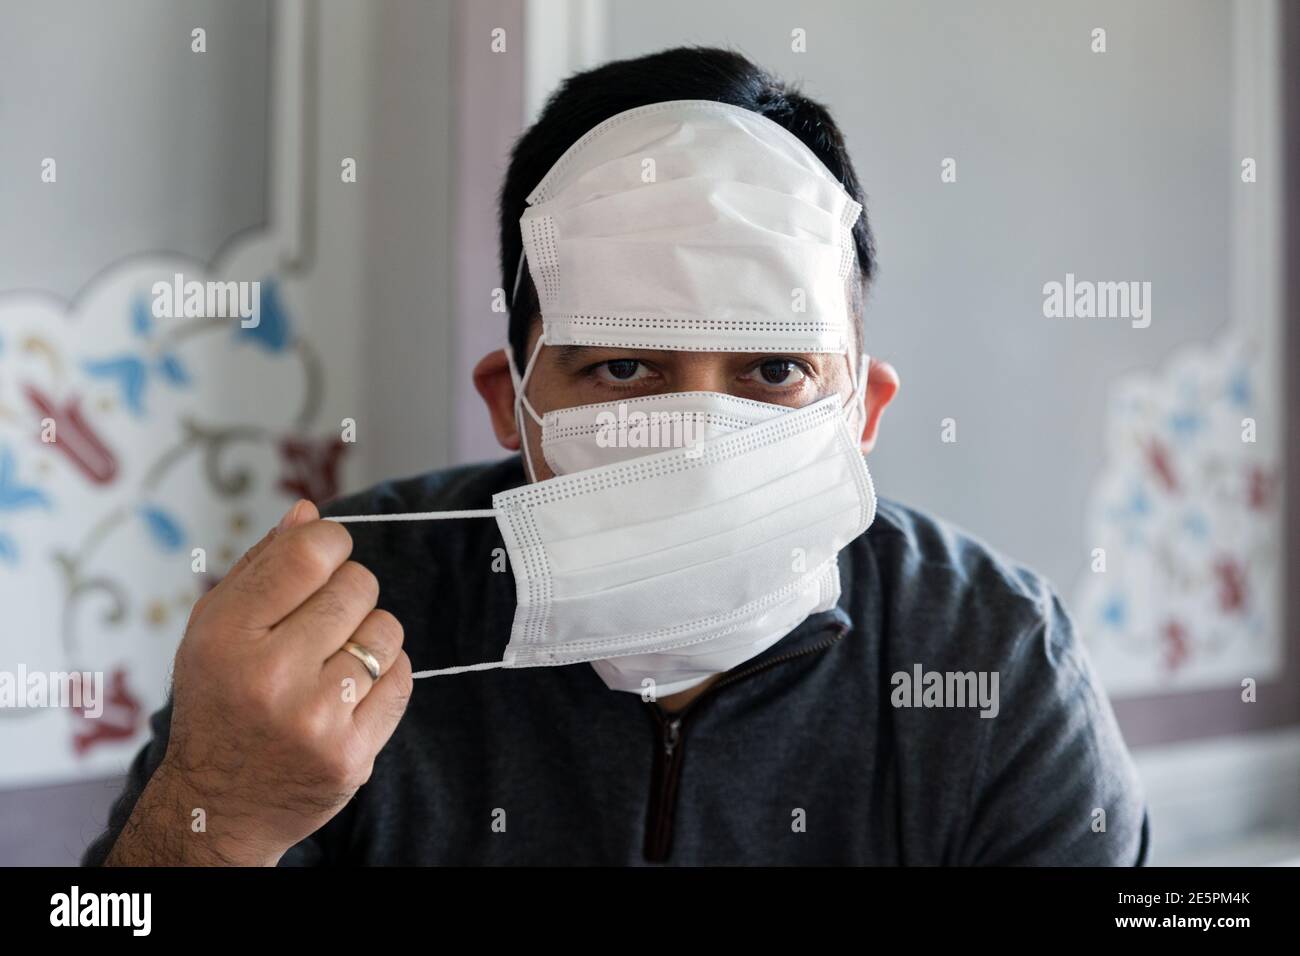 Interior shot front portrait of man with multiple masks, looking into lens Stock Photo